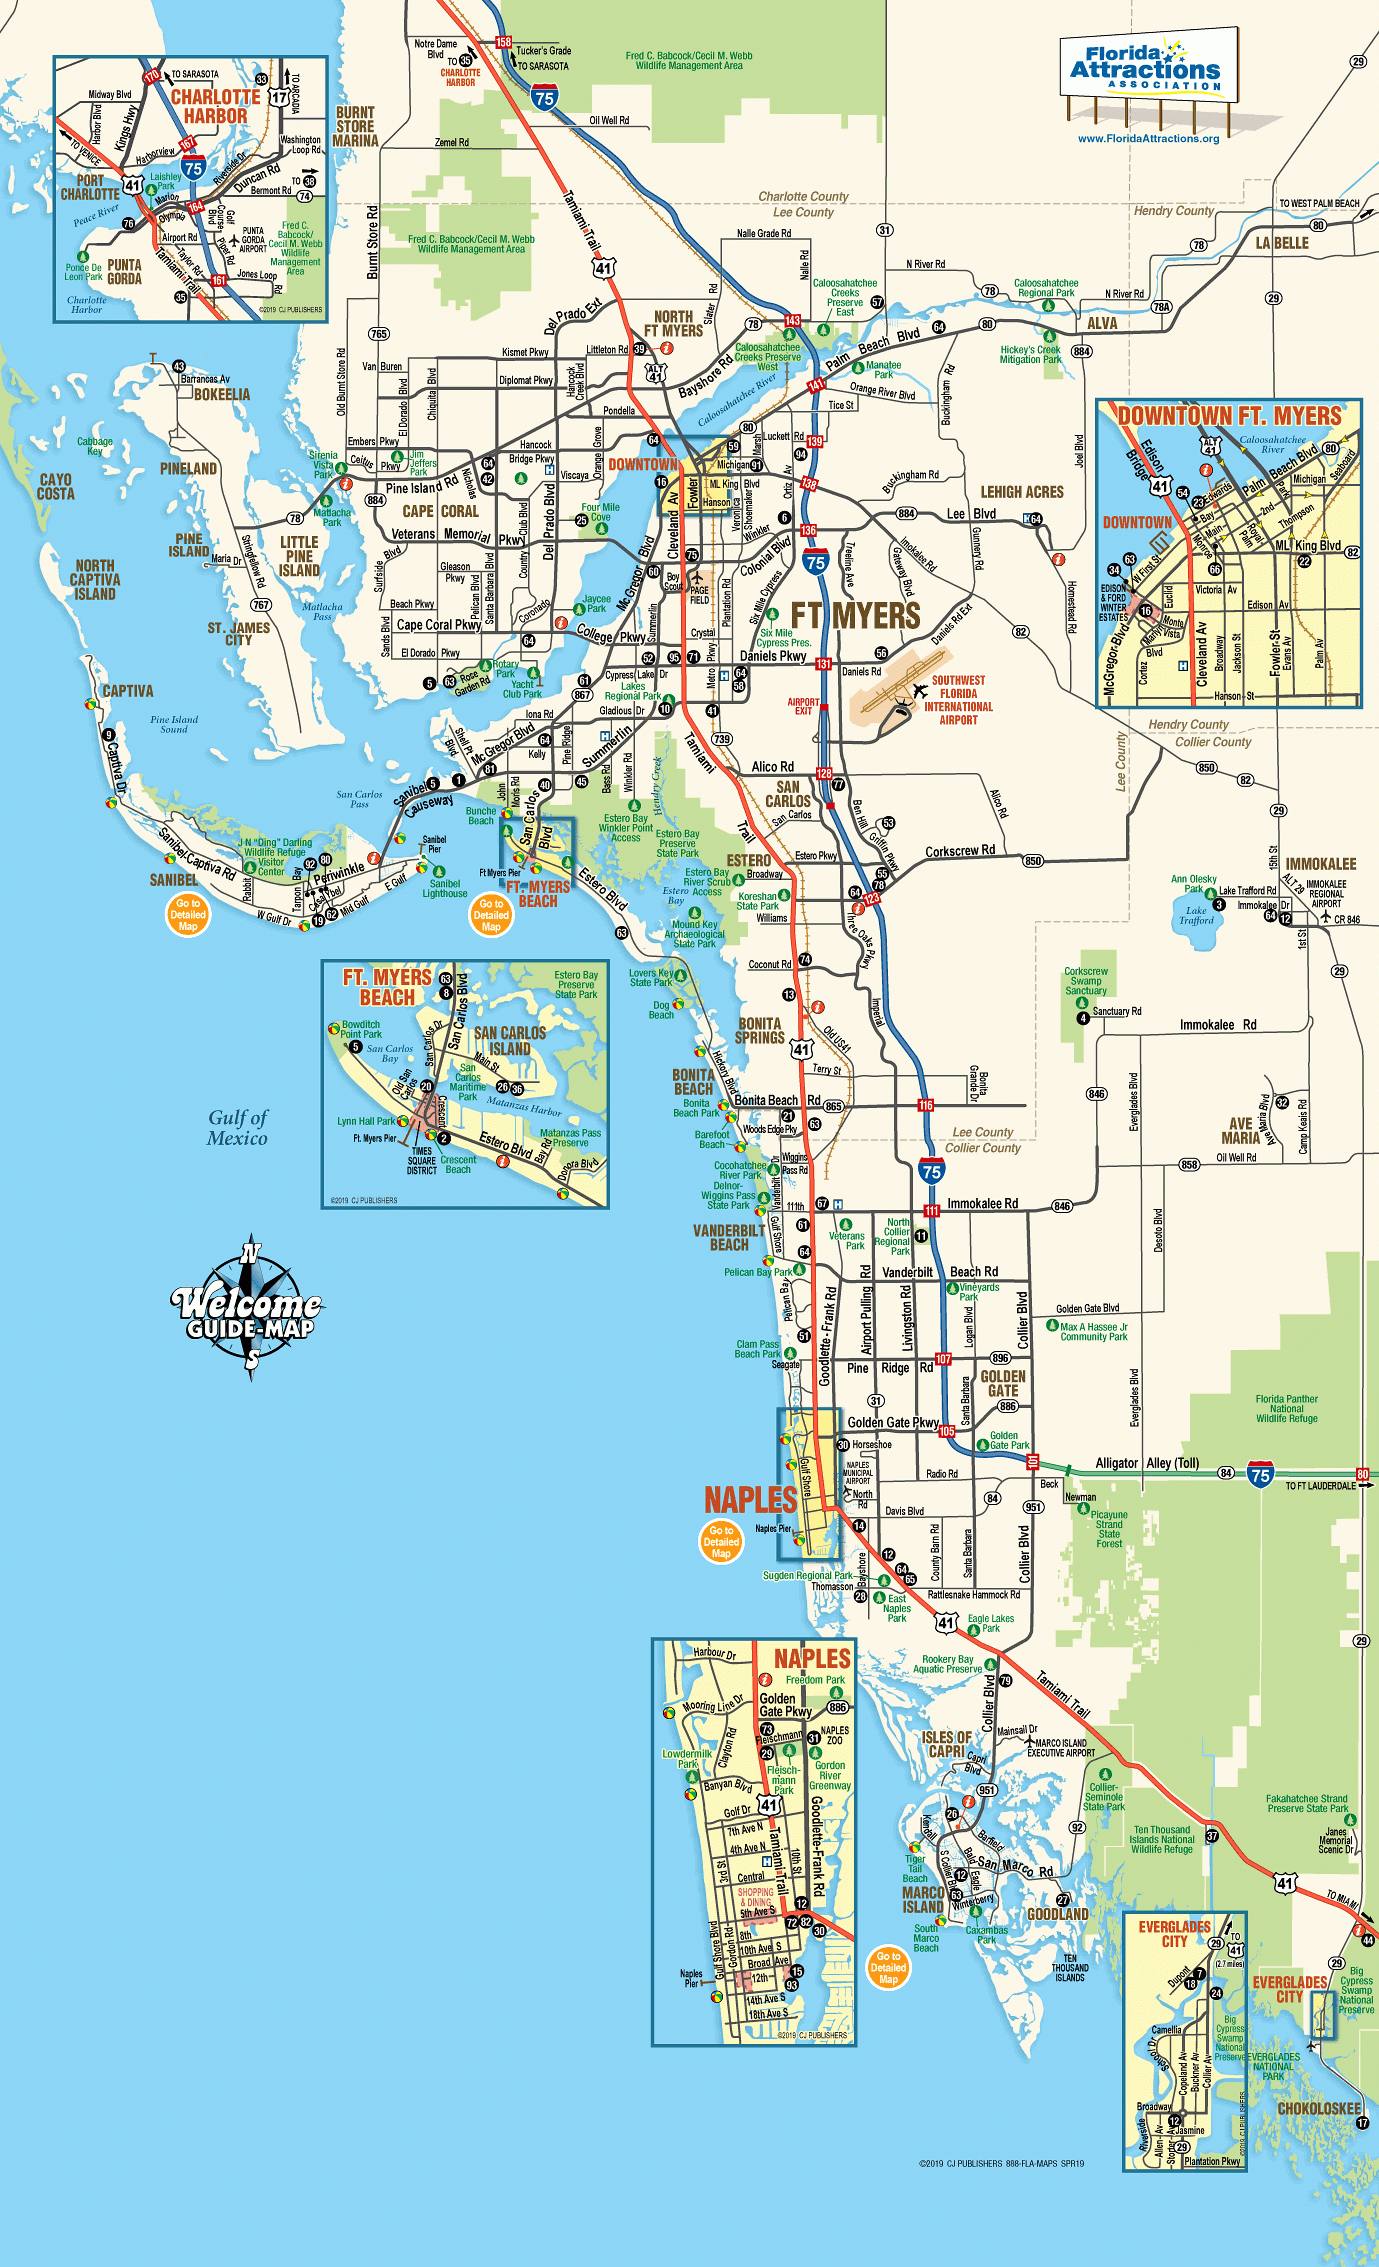 Map Of Southwest Florida - Welcome Guide-Map To Fort Myers &amp;amp; Naples - Fort Meyer Florida Map